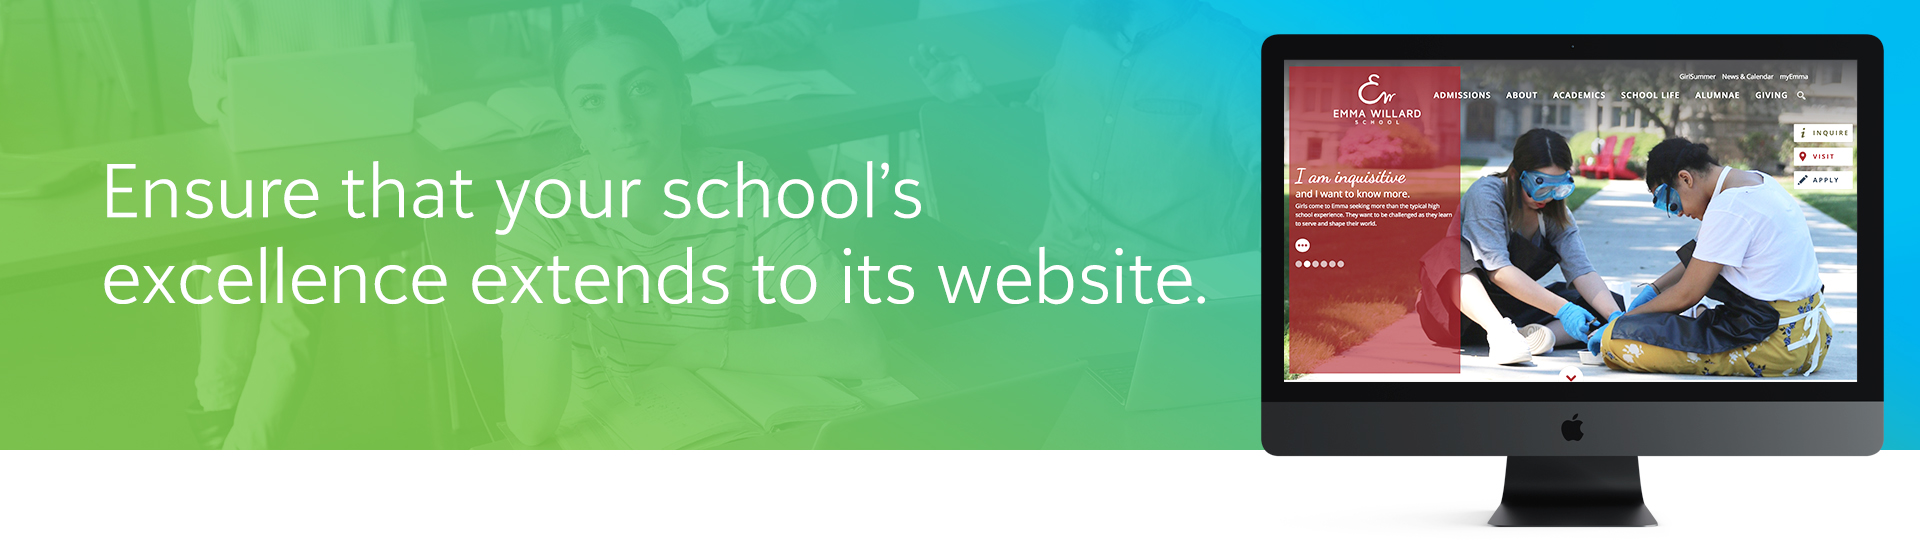 Ensure that your school's excellence extends to its website.